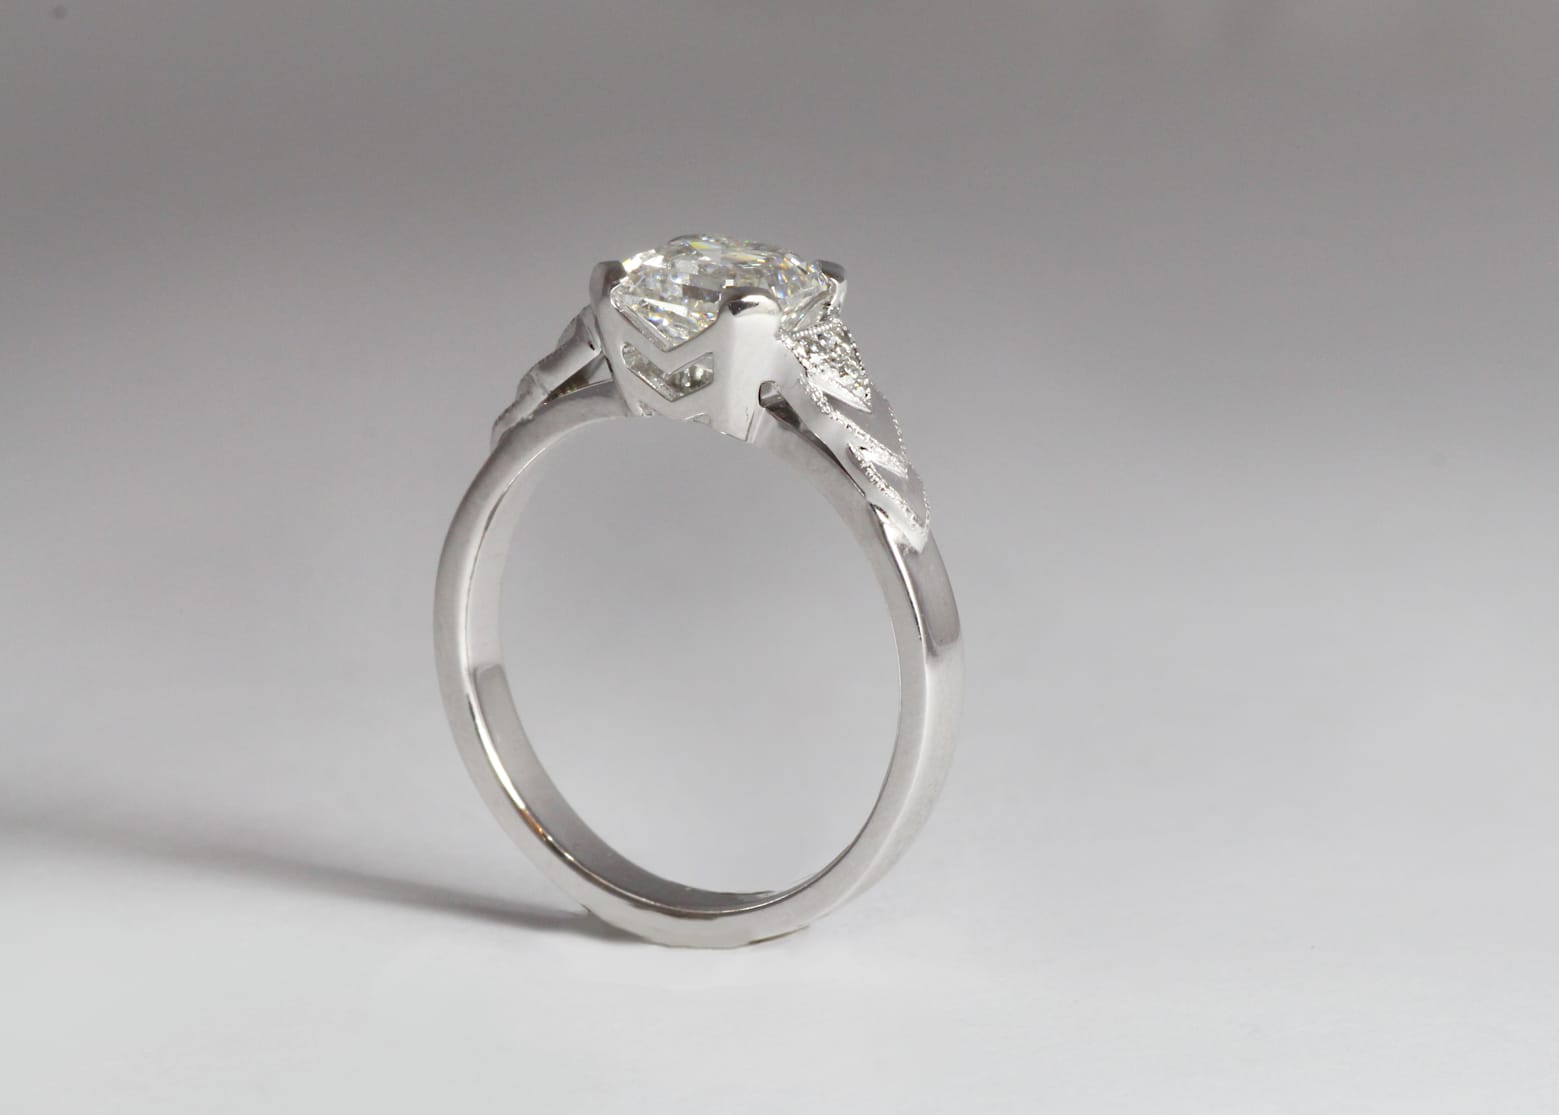 18ct Fairtrade white gold with diamonds by Zoe Pook Jewellery